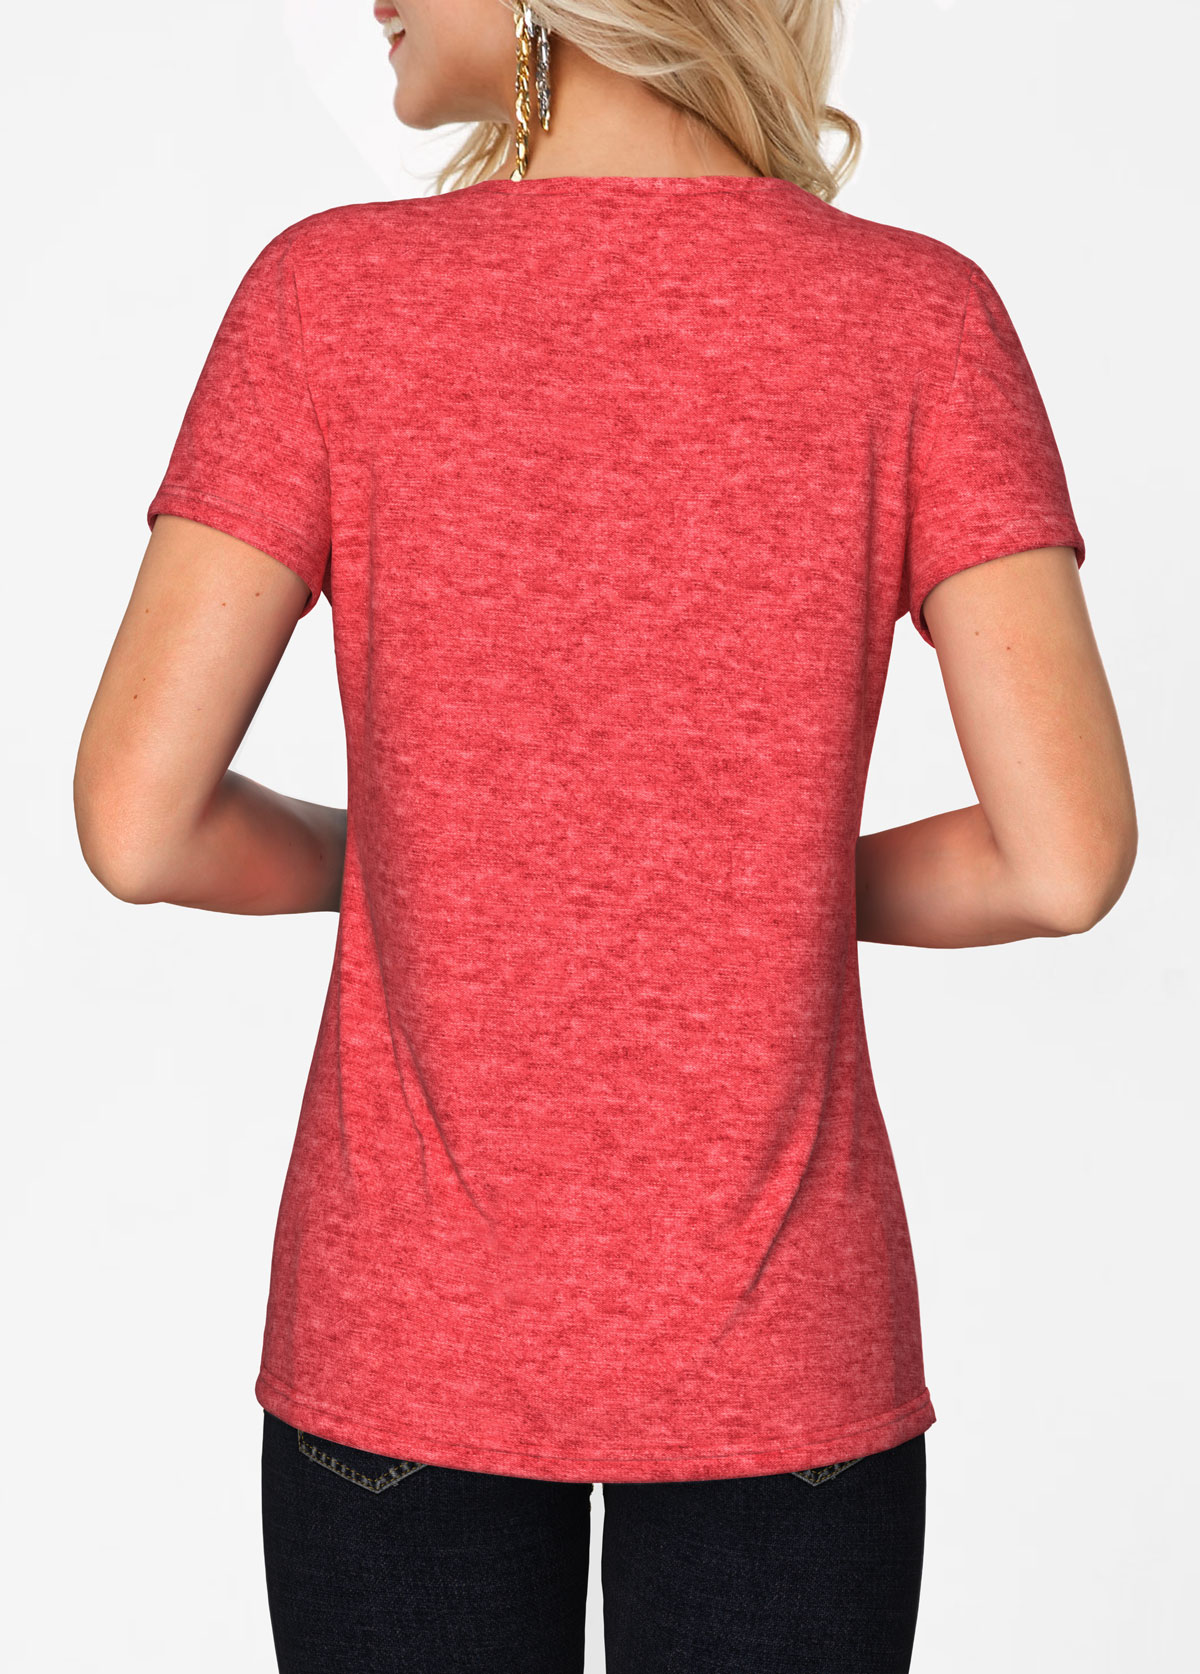 Short Sleeve Coral Red Crinkle Chest T Shirt 